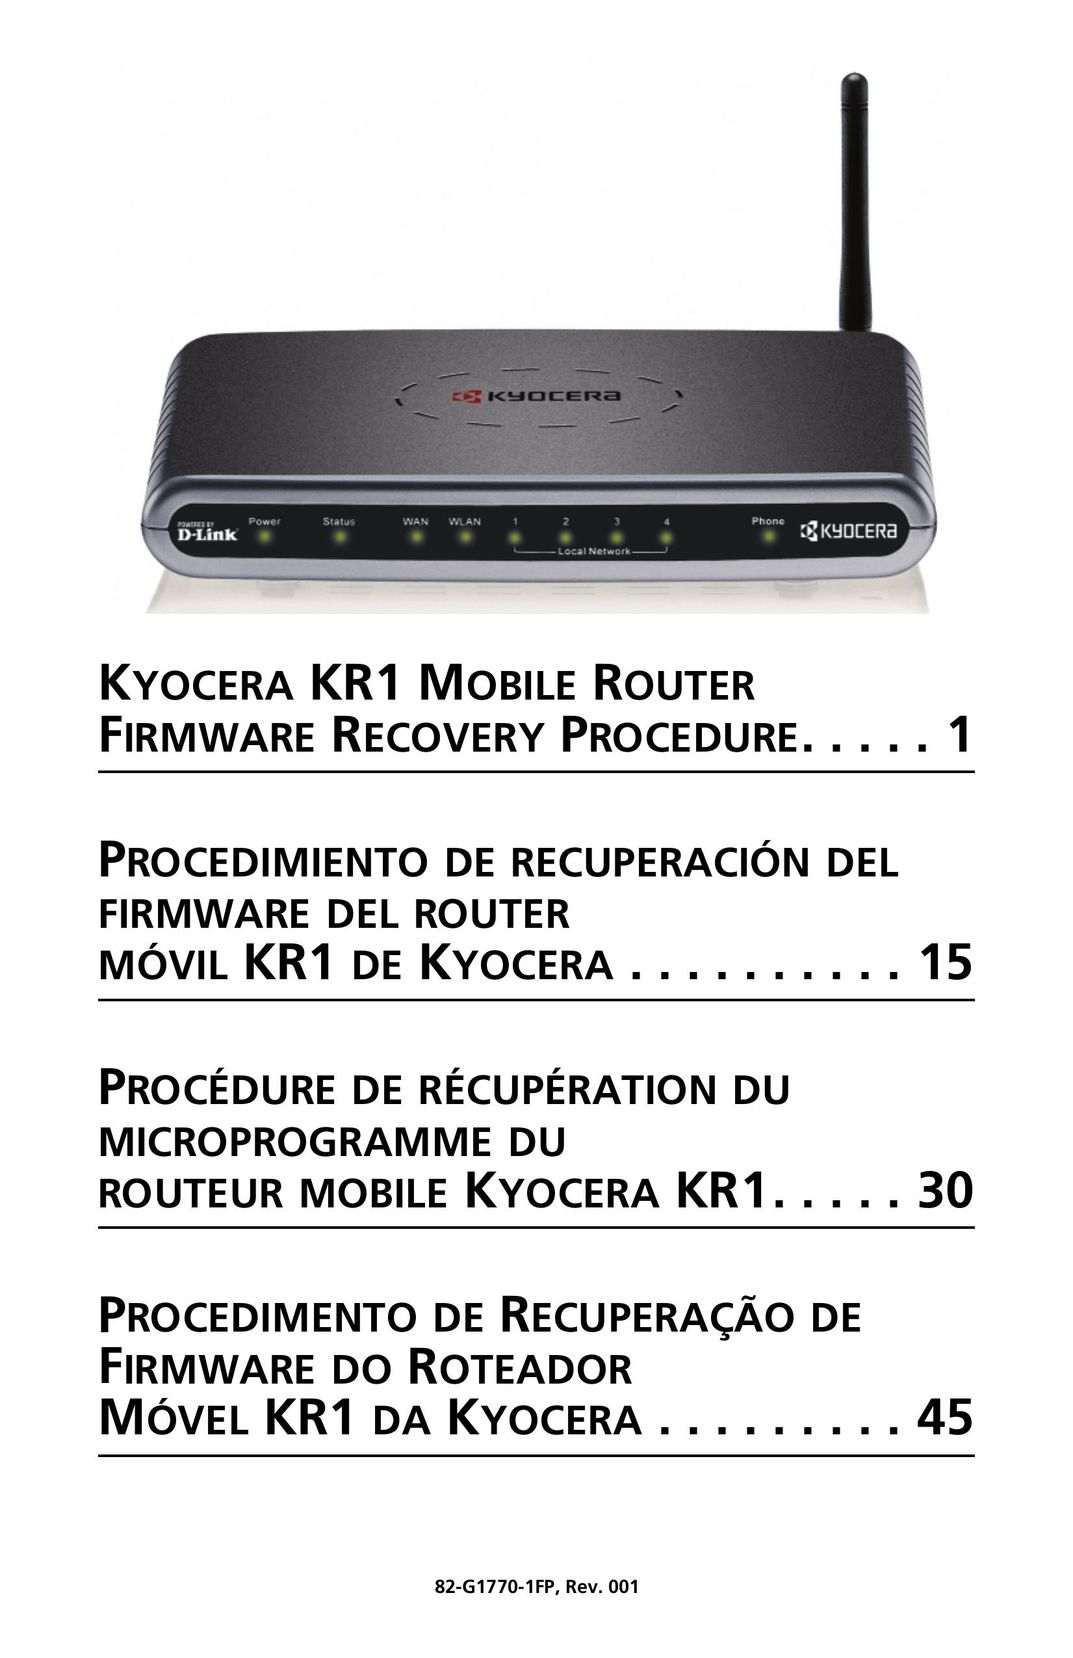 Kyocera 82-G1770-1FP Network Router User Manual